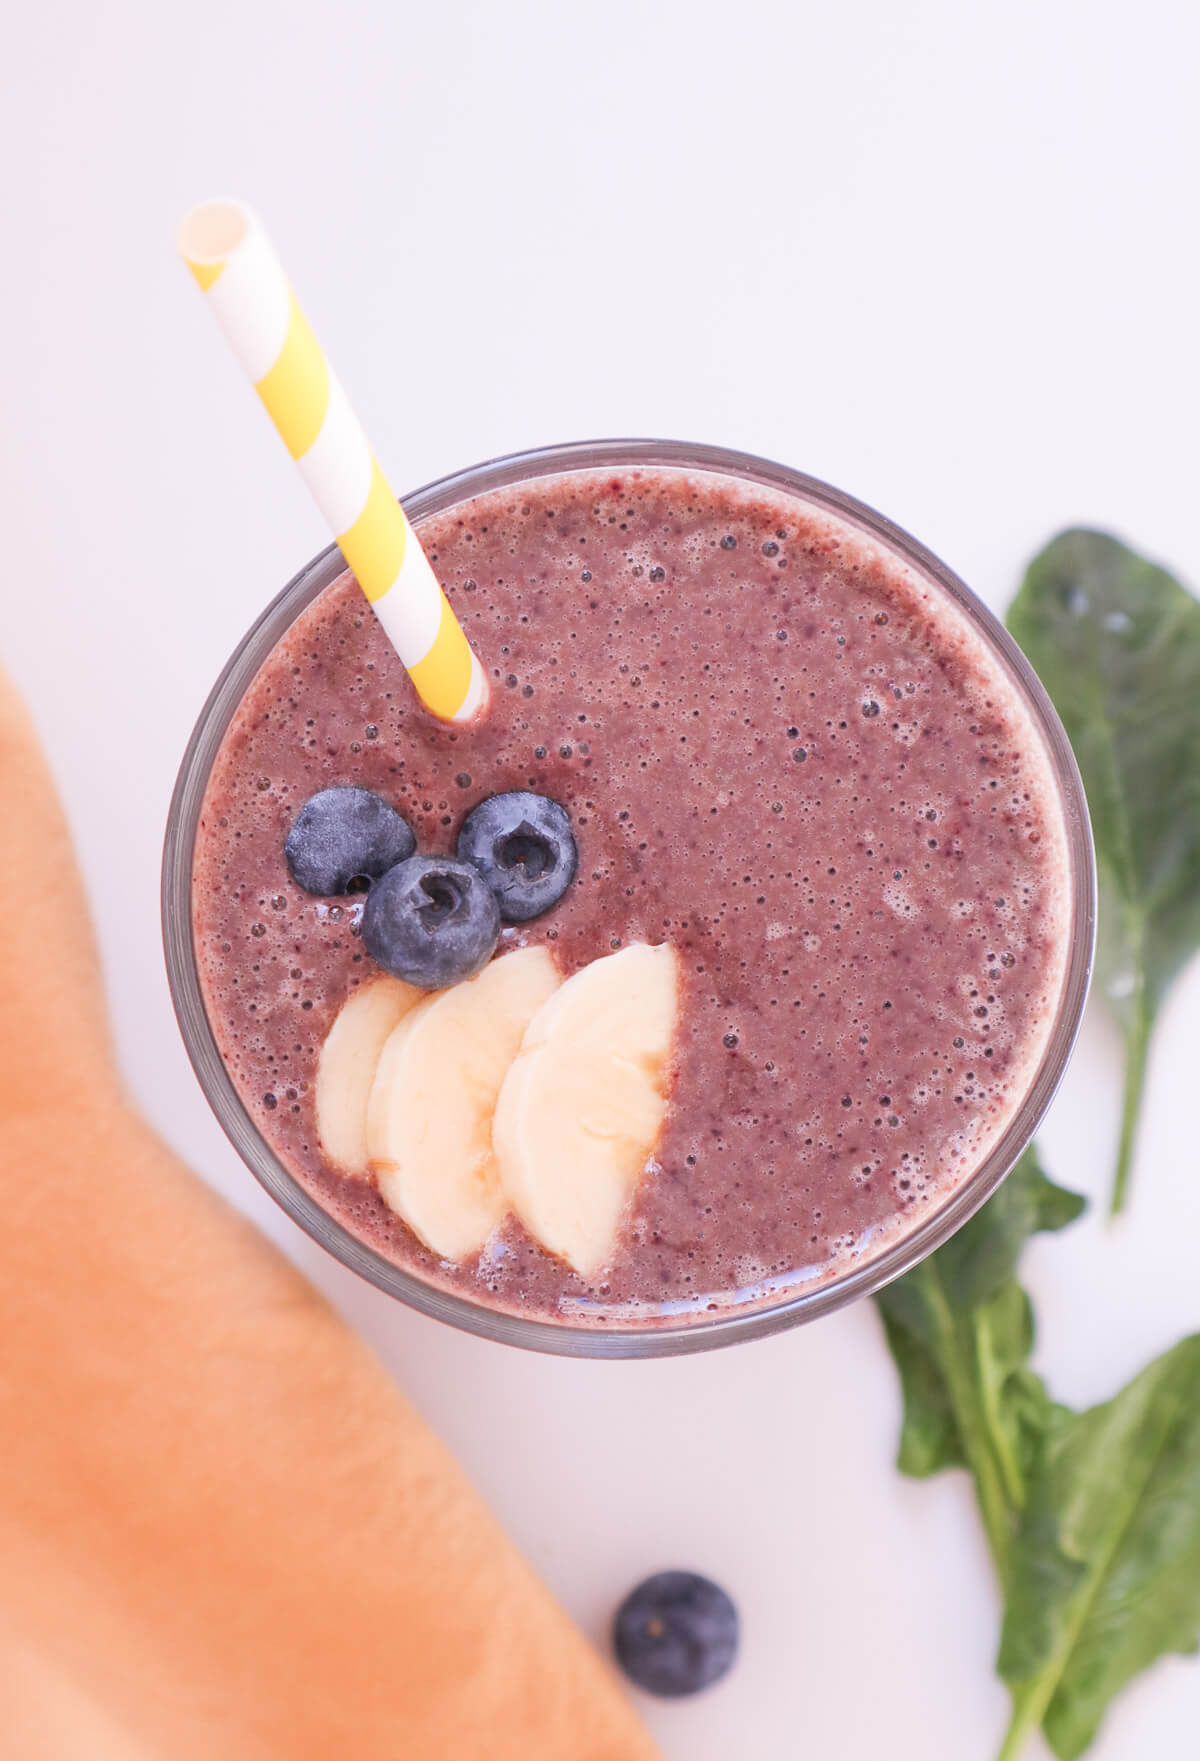 Top down view of purple smoothie with blueberries, bananas and a yellow straw. 